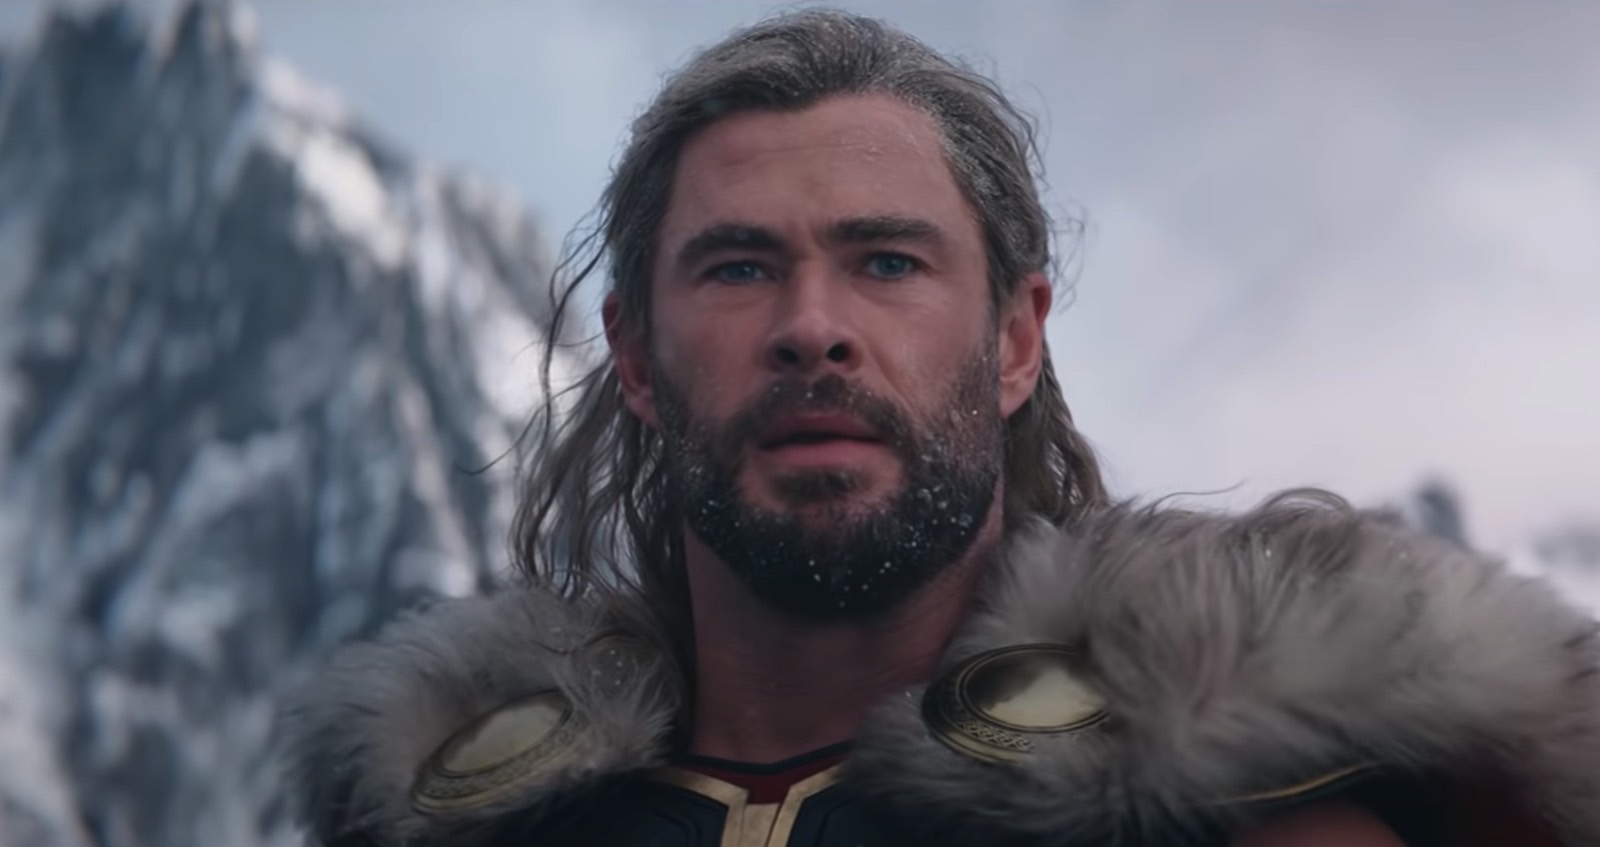 First Thor 4 trailer doesn’t show Gorr, but it teases the newest Marvel villain